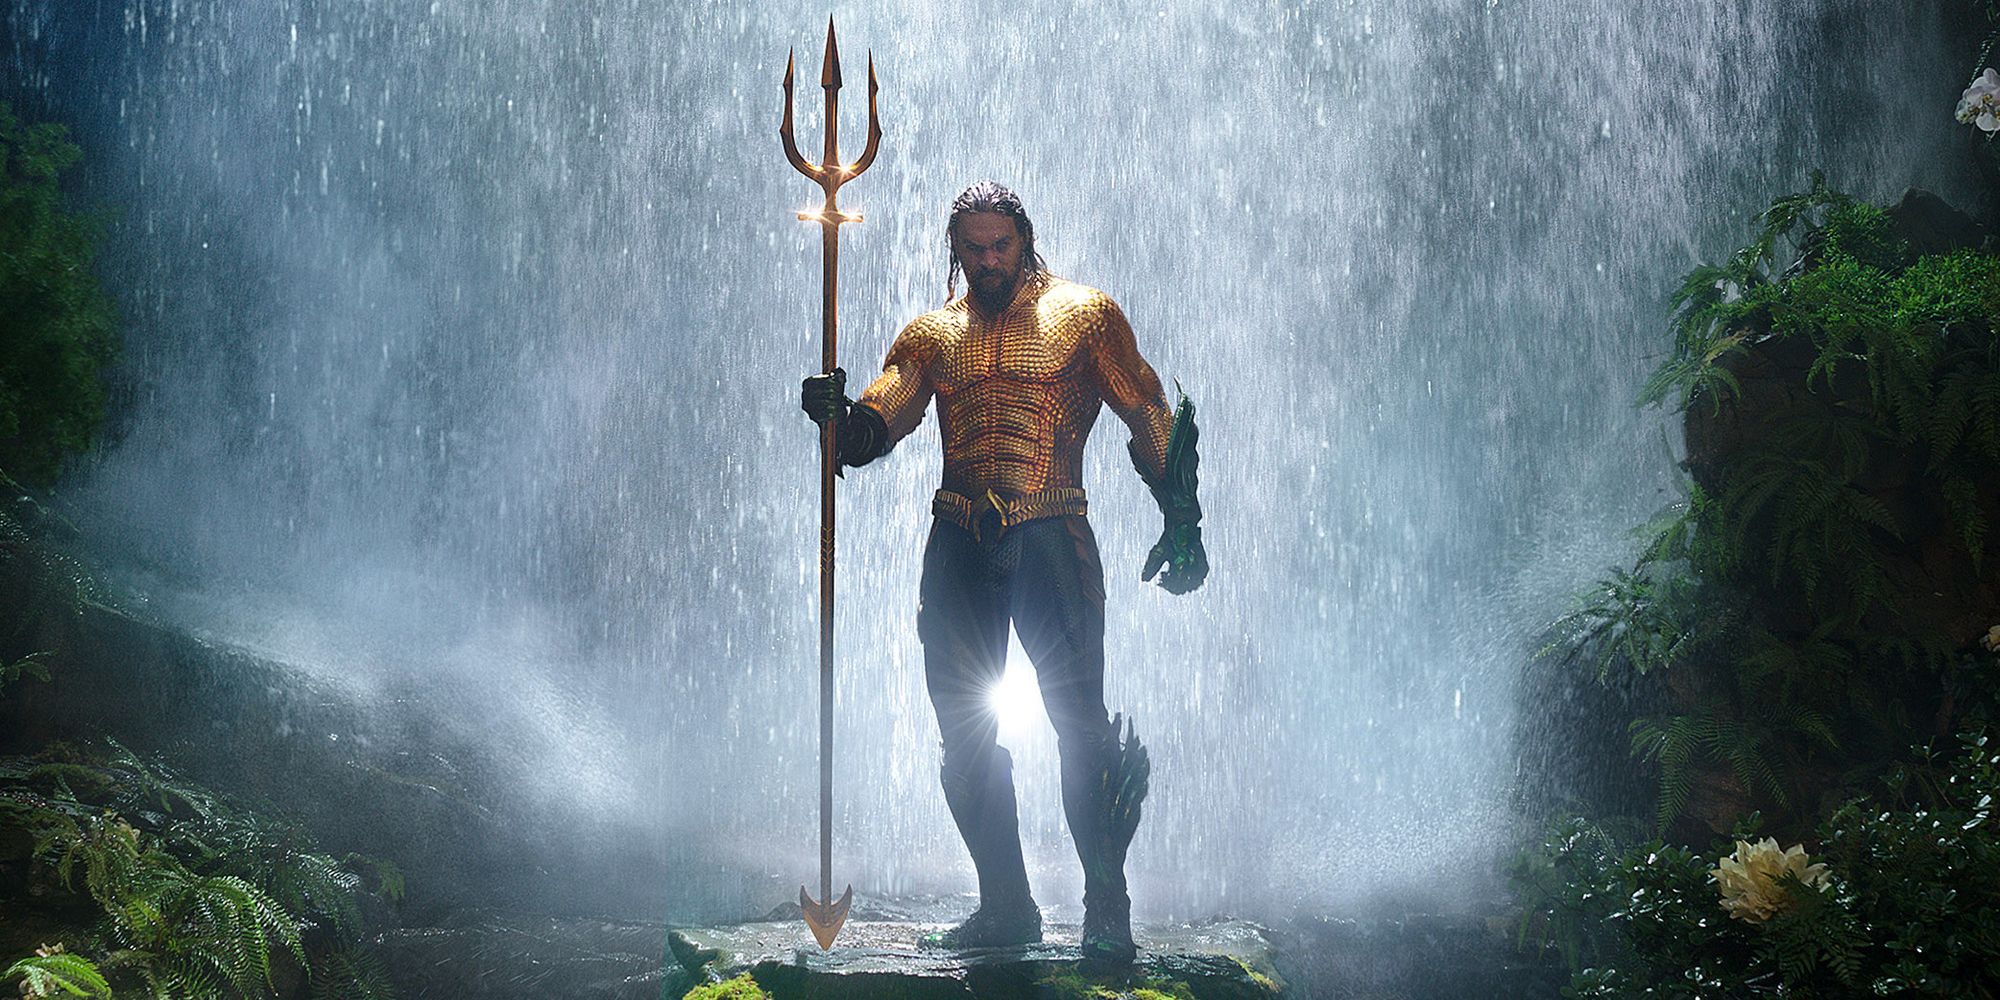 Aquaman standing in front of a waterfall holding his trident in Aquaman and the Lost Kingdom